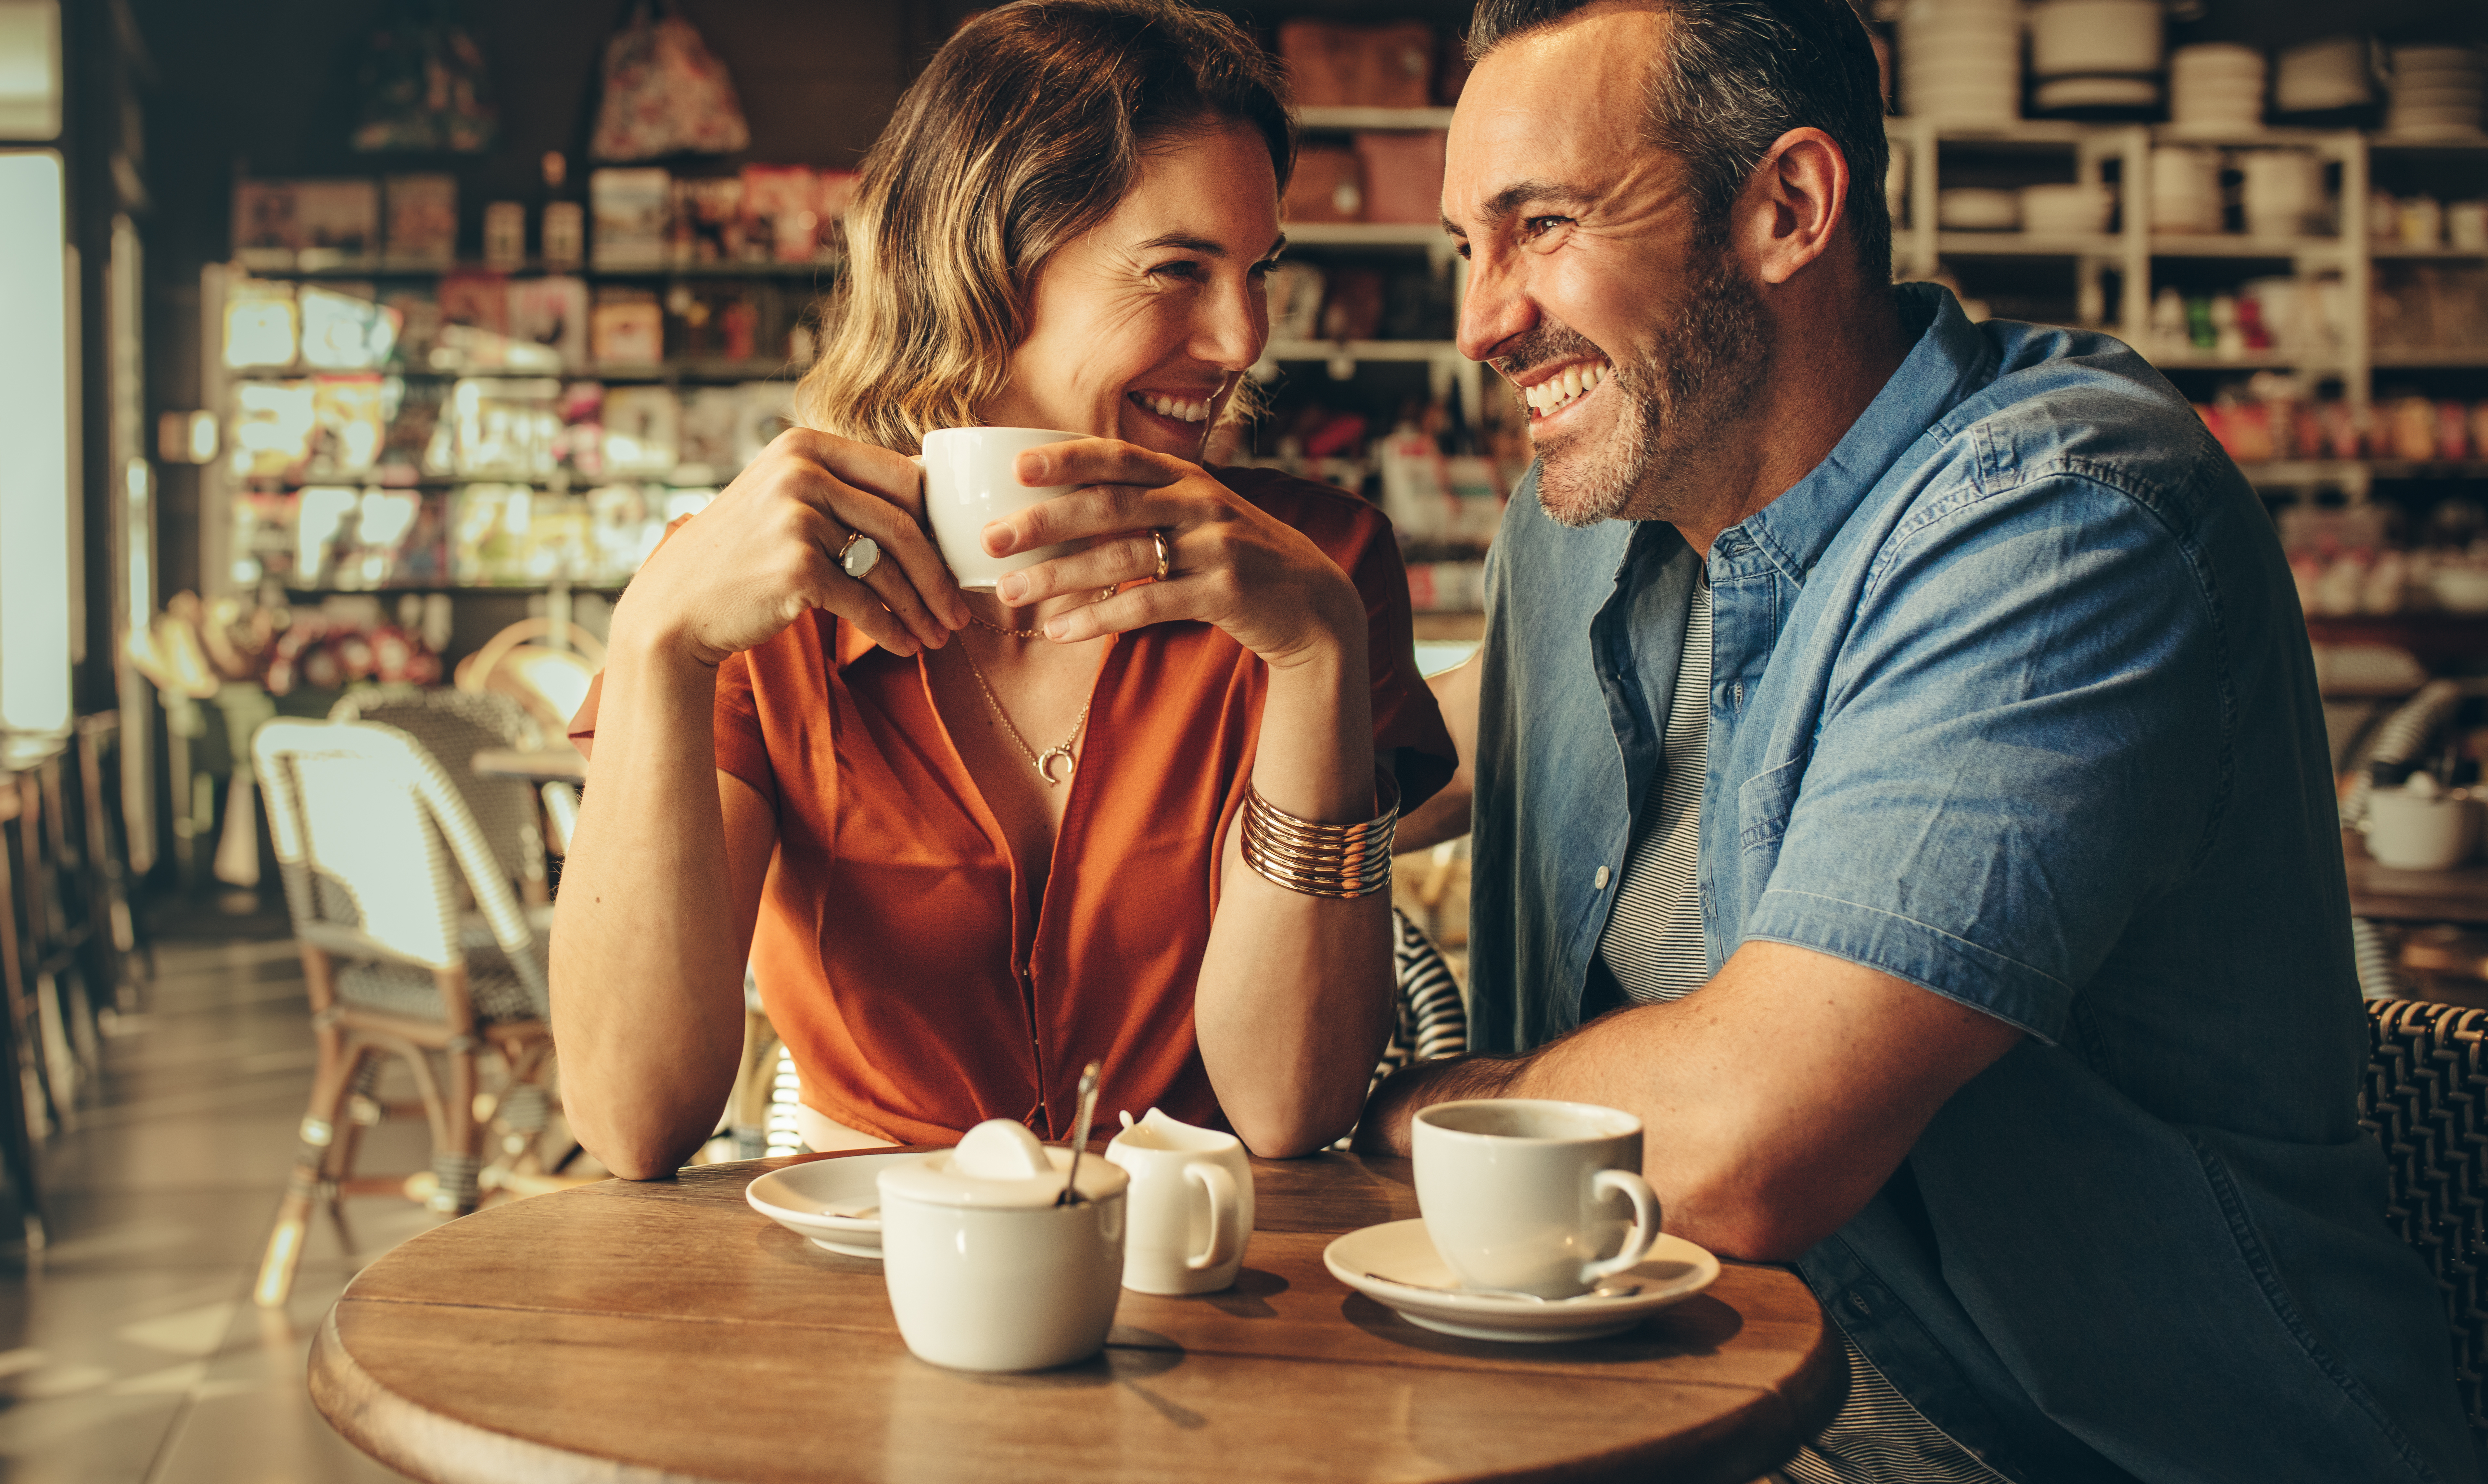 A happy couple laughing over coffee | Source: Shutterstock